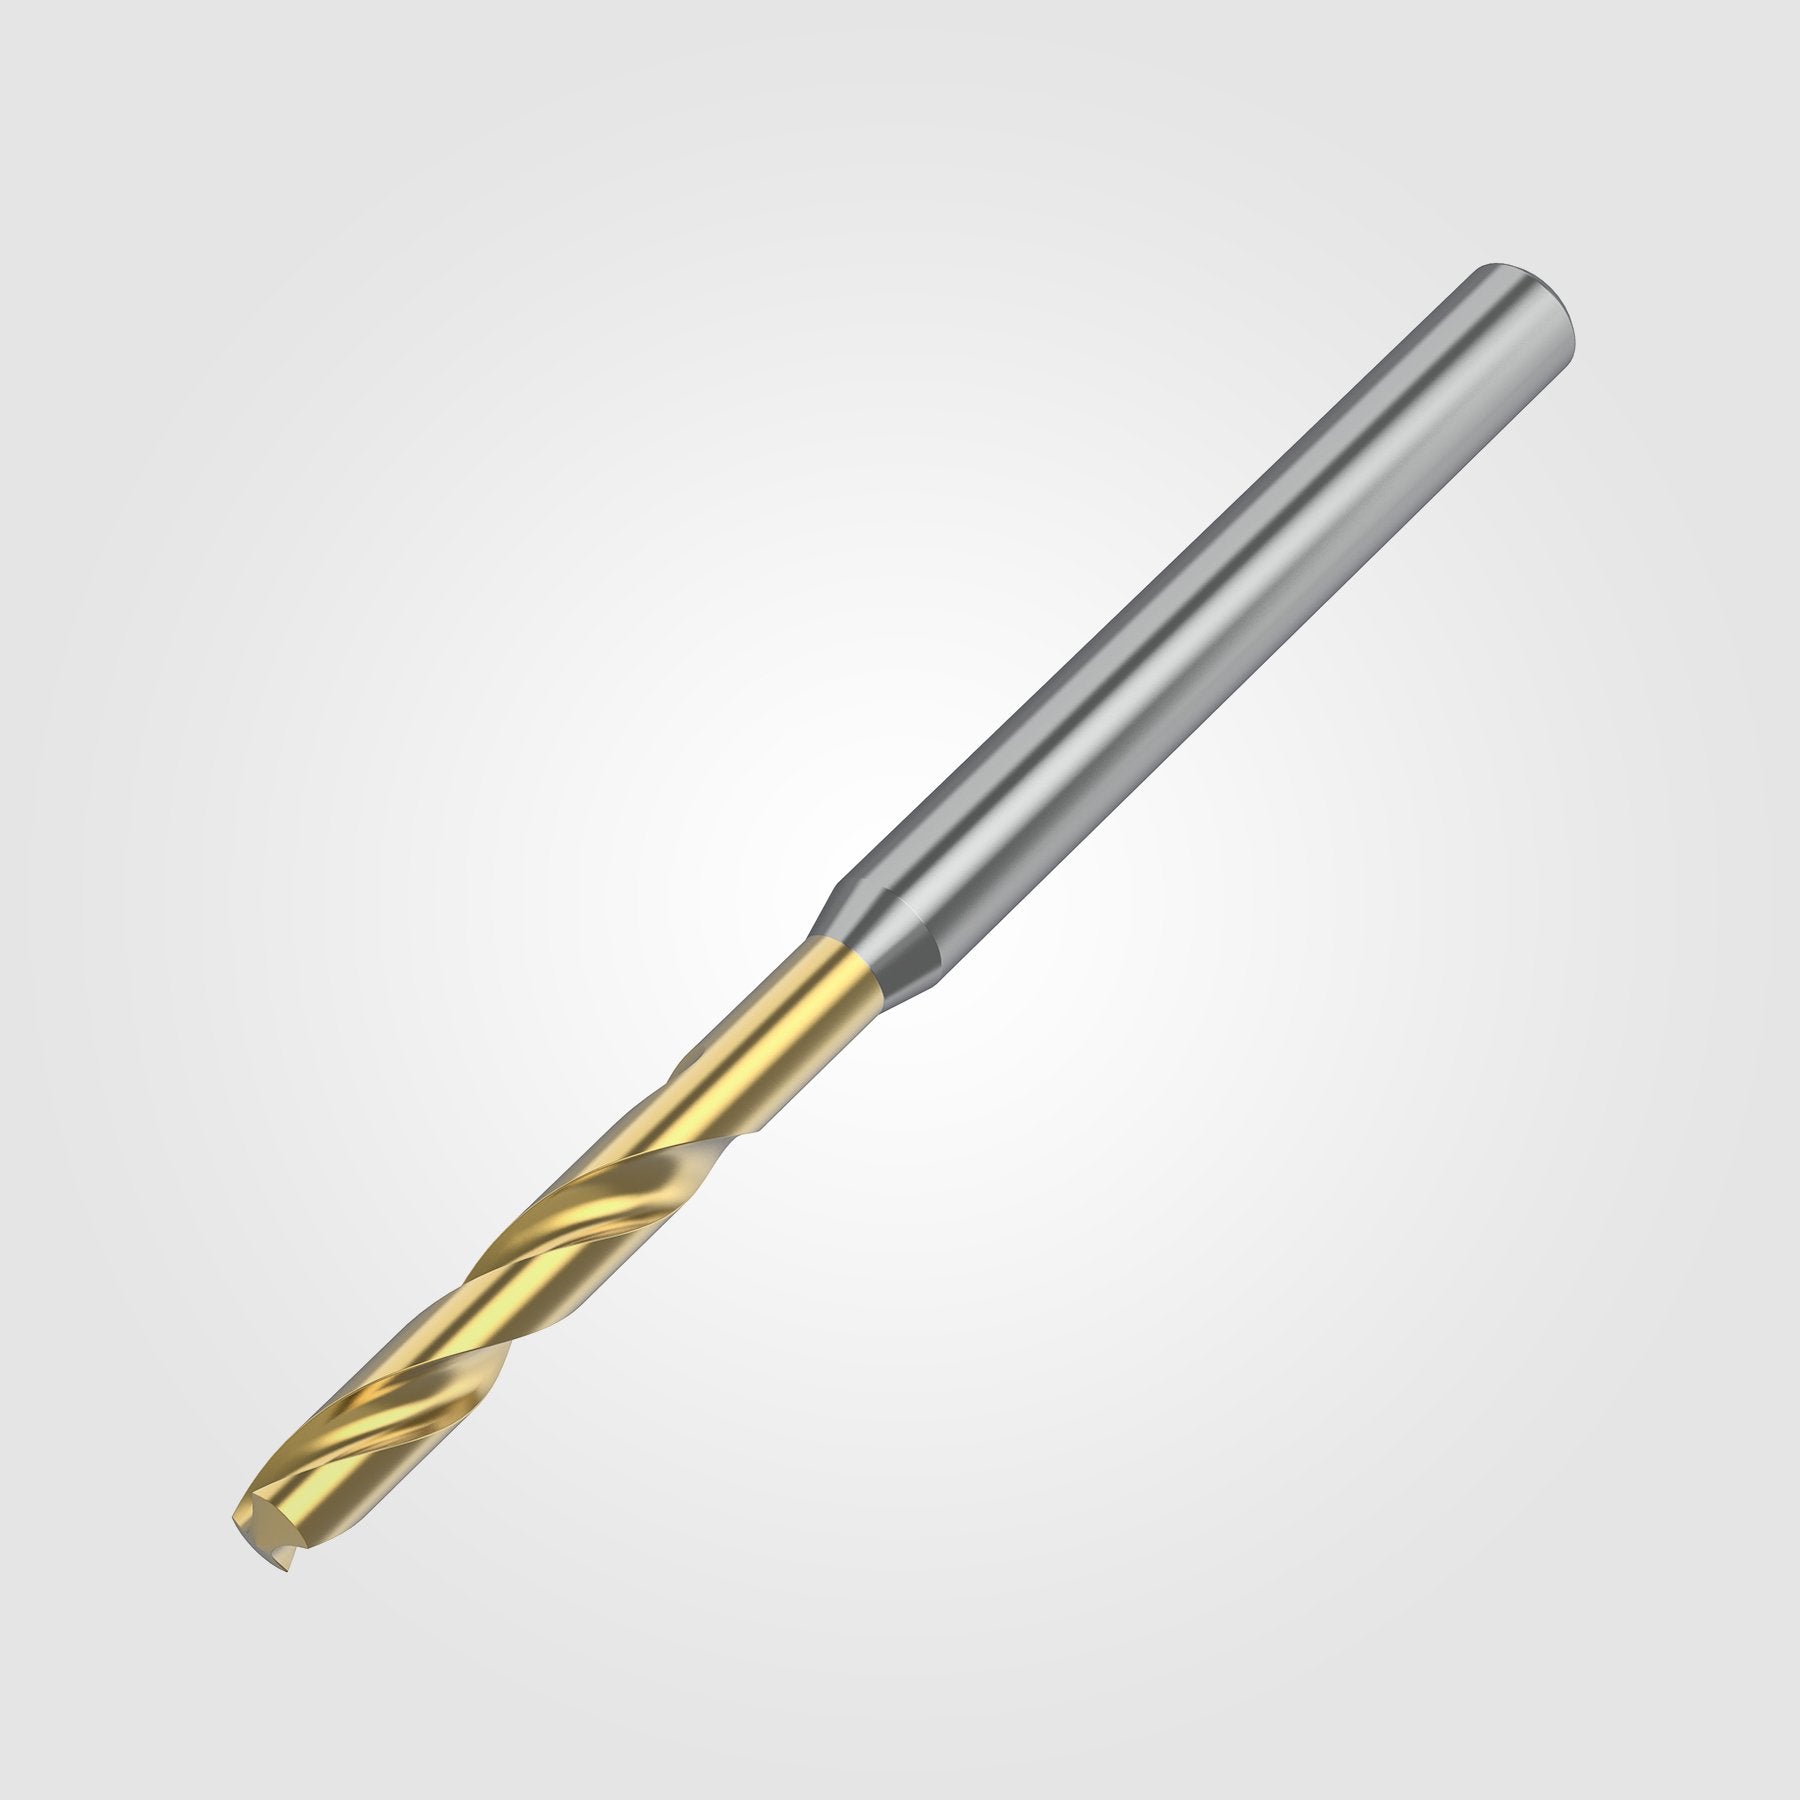 GOdrill (THROUGH COOLANT) | 15.479mm / .6094" / 3xD | SOLID CARBIDE DRILL | 4151269